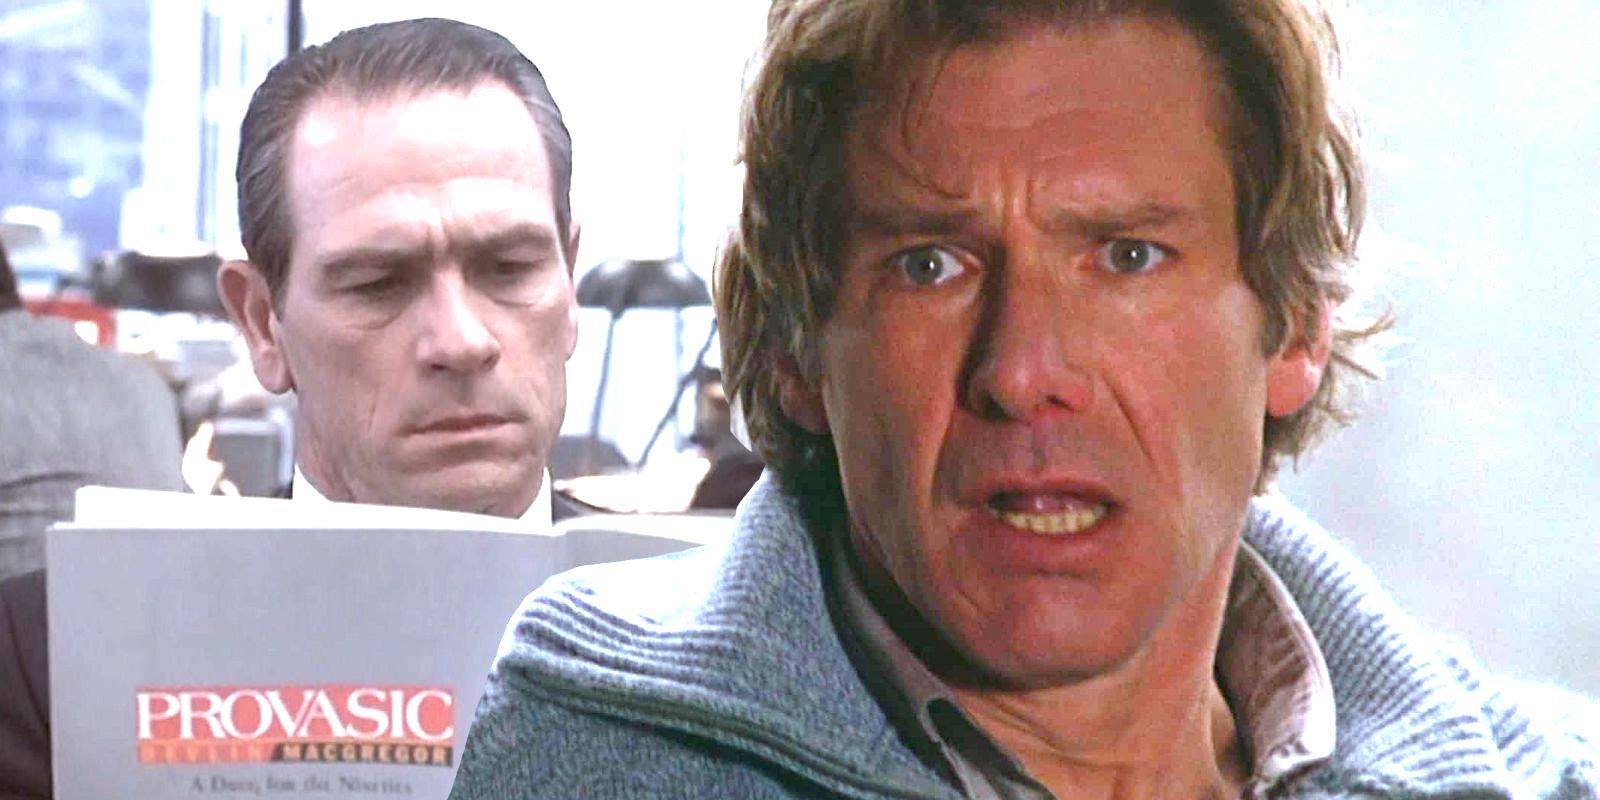 Fugitive collage of Tommy Lee Jones reading Devlin-MacGregor literature on Provasic plus a close up of Harrison Ford.